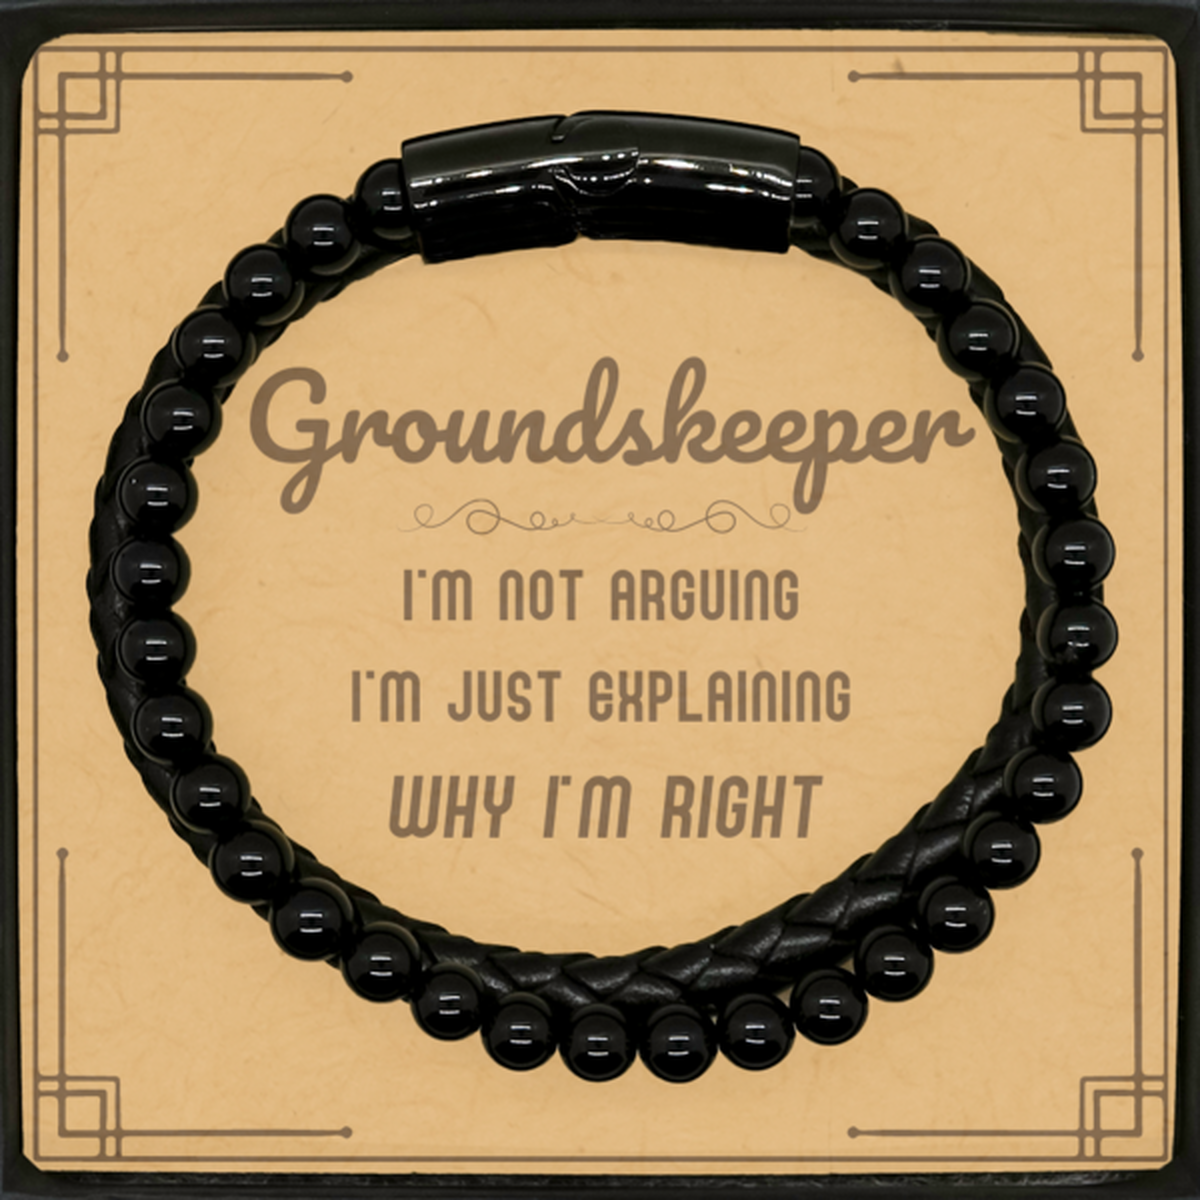 Groundskeeper I'm not Arguing. I'm Just Explaining Why I'm RIGHT Stone Leather Bracelets, Funny Saying Quote Groundskeeper Gifts For Groundskeeper Message Card Graduation Birthday Christmas Gifts for Men Women Coworker